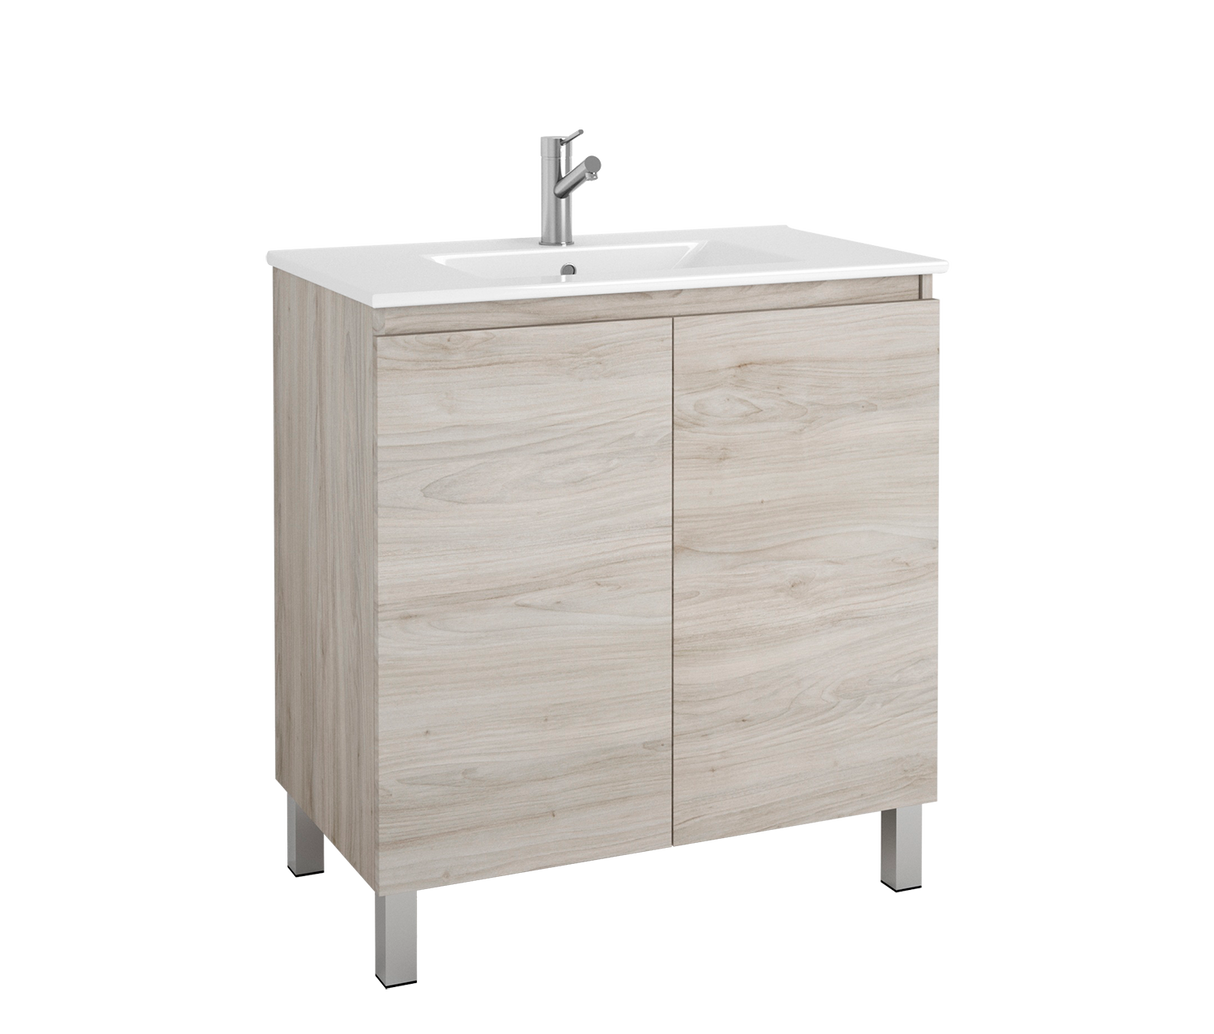 DAX Sunset Engineered Wood and Porcelain Onix Basin and Vanity, 32", Pine DAX-SUN013212-ONX